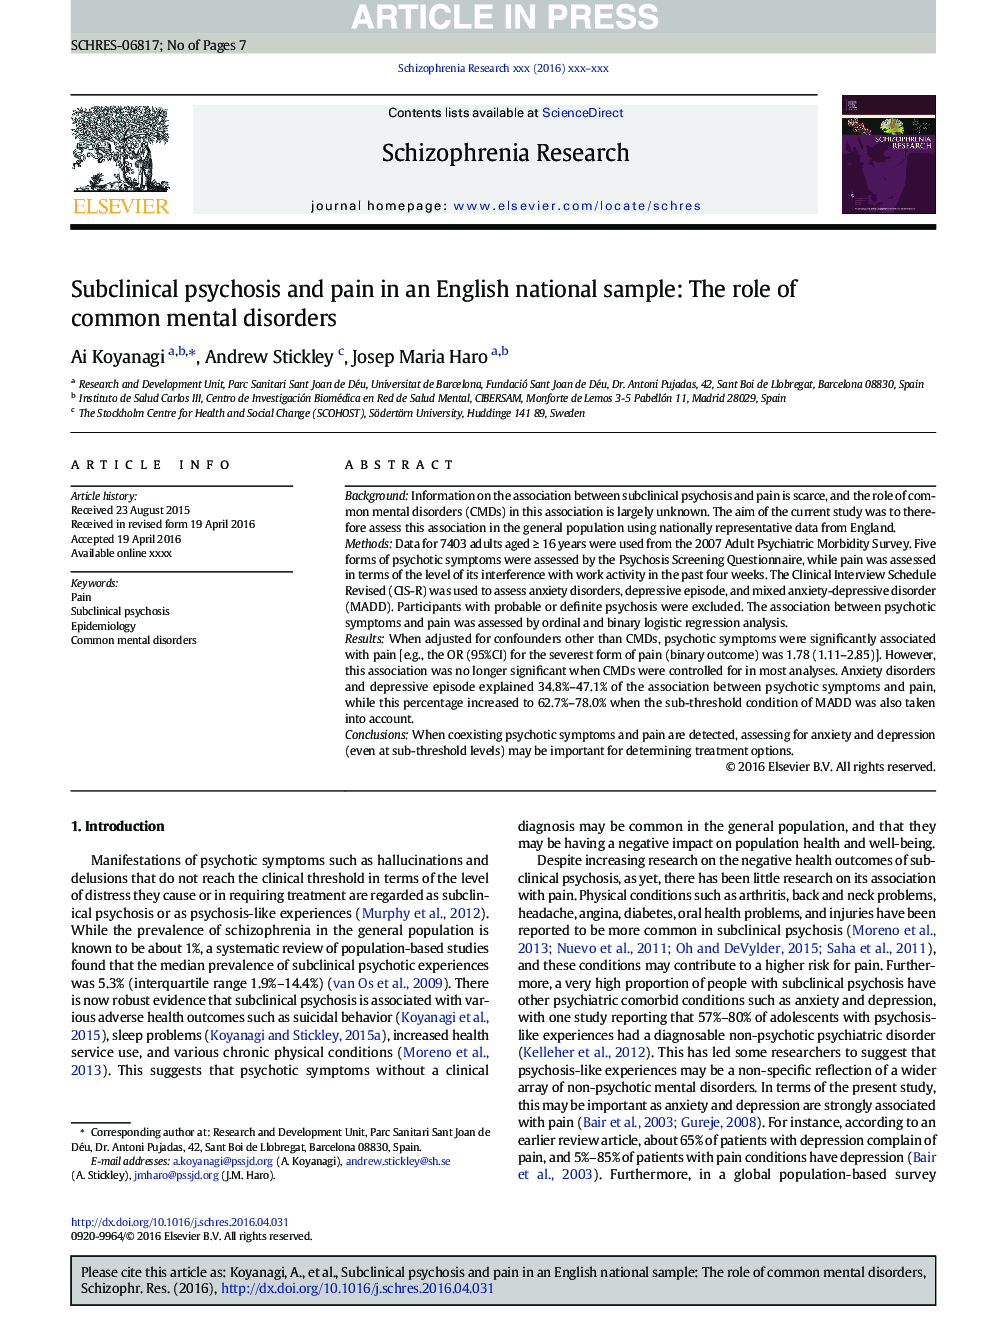 Subclinical psychosis and pain in an English national sample: The role of common mental disorders